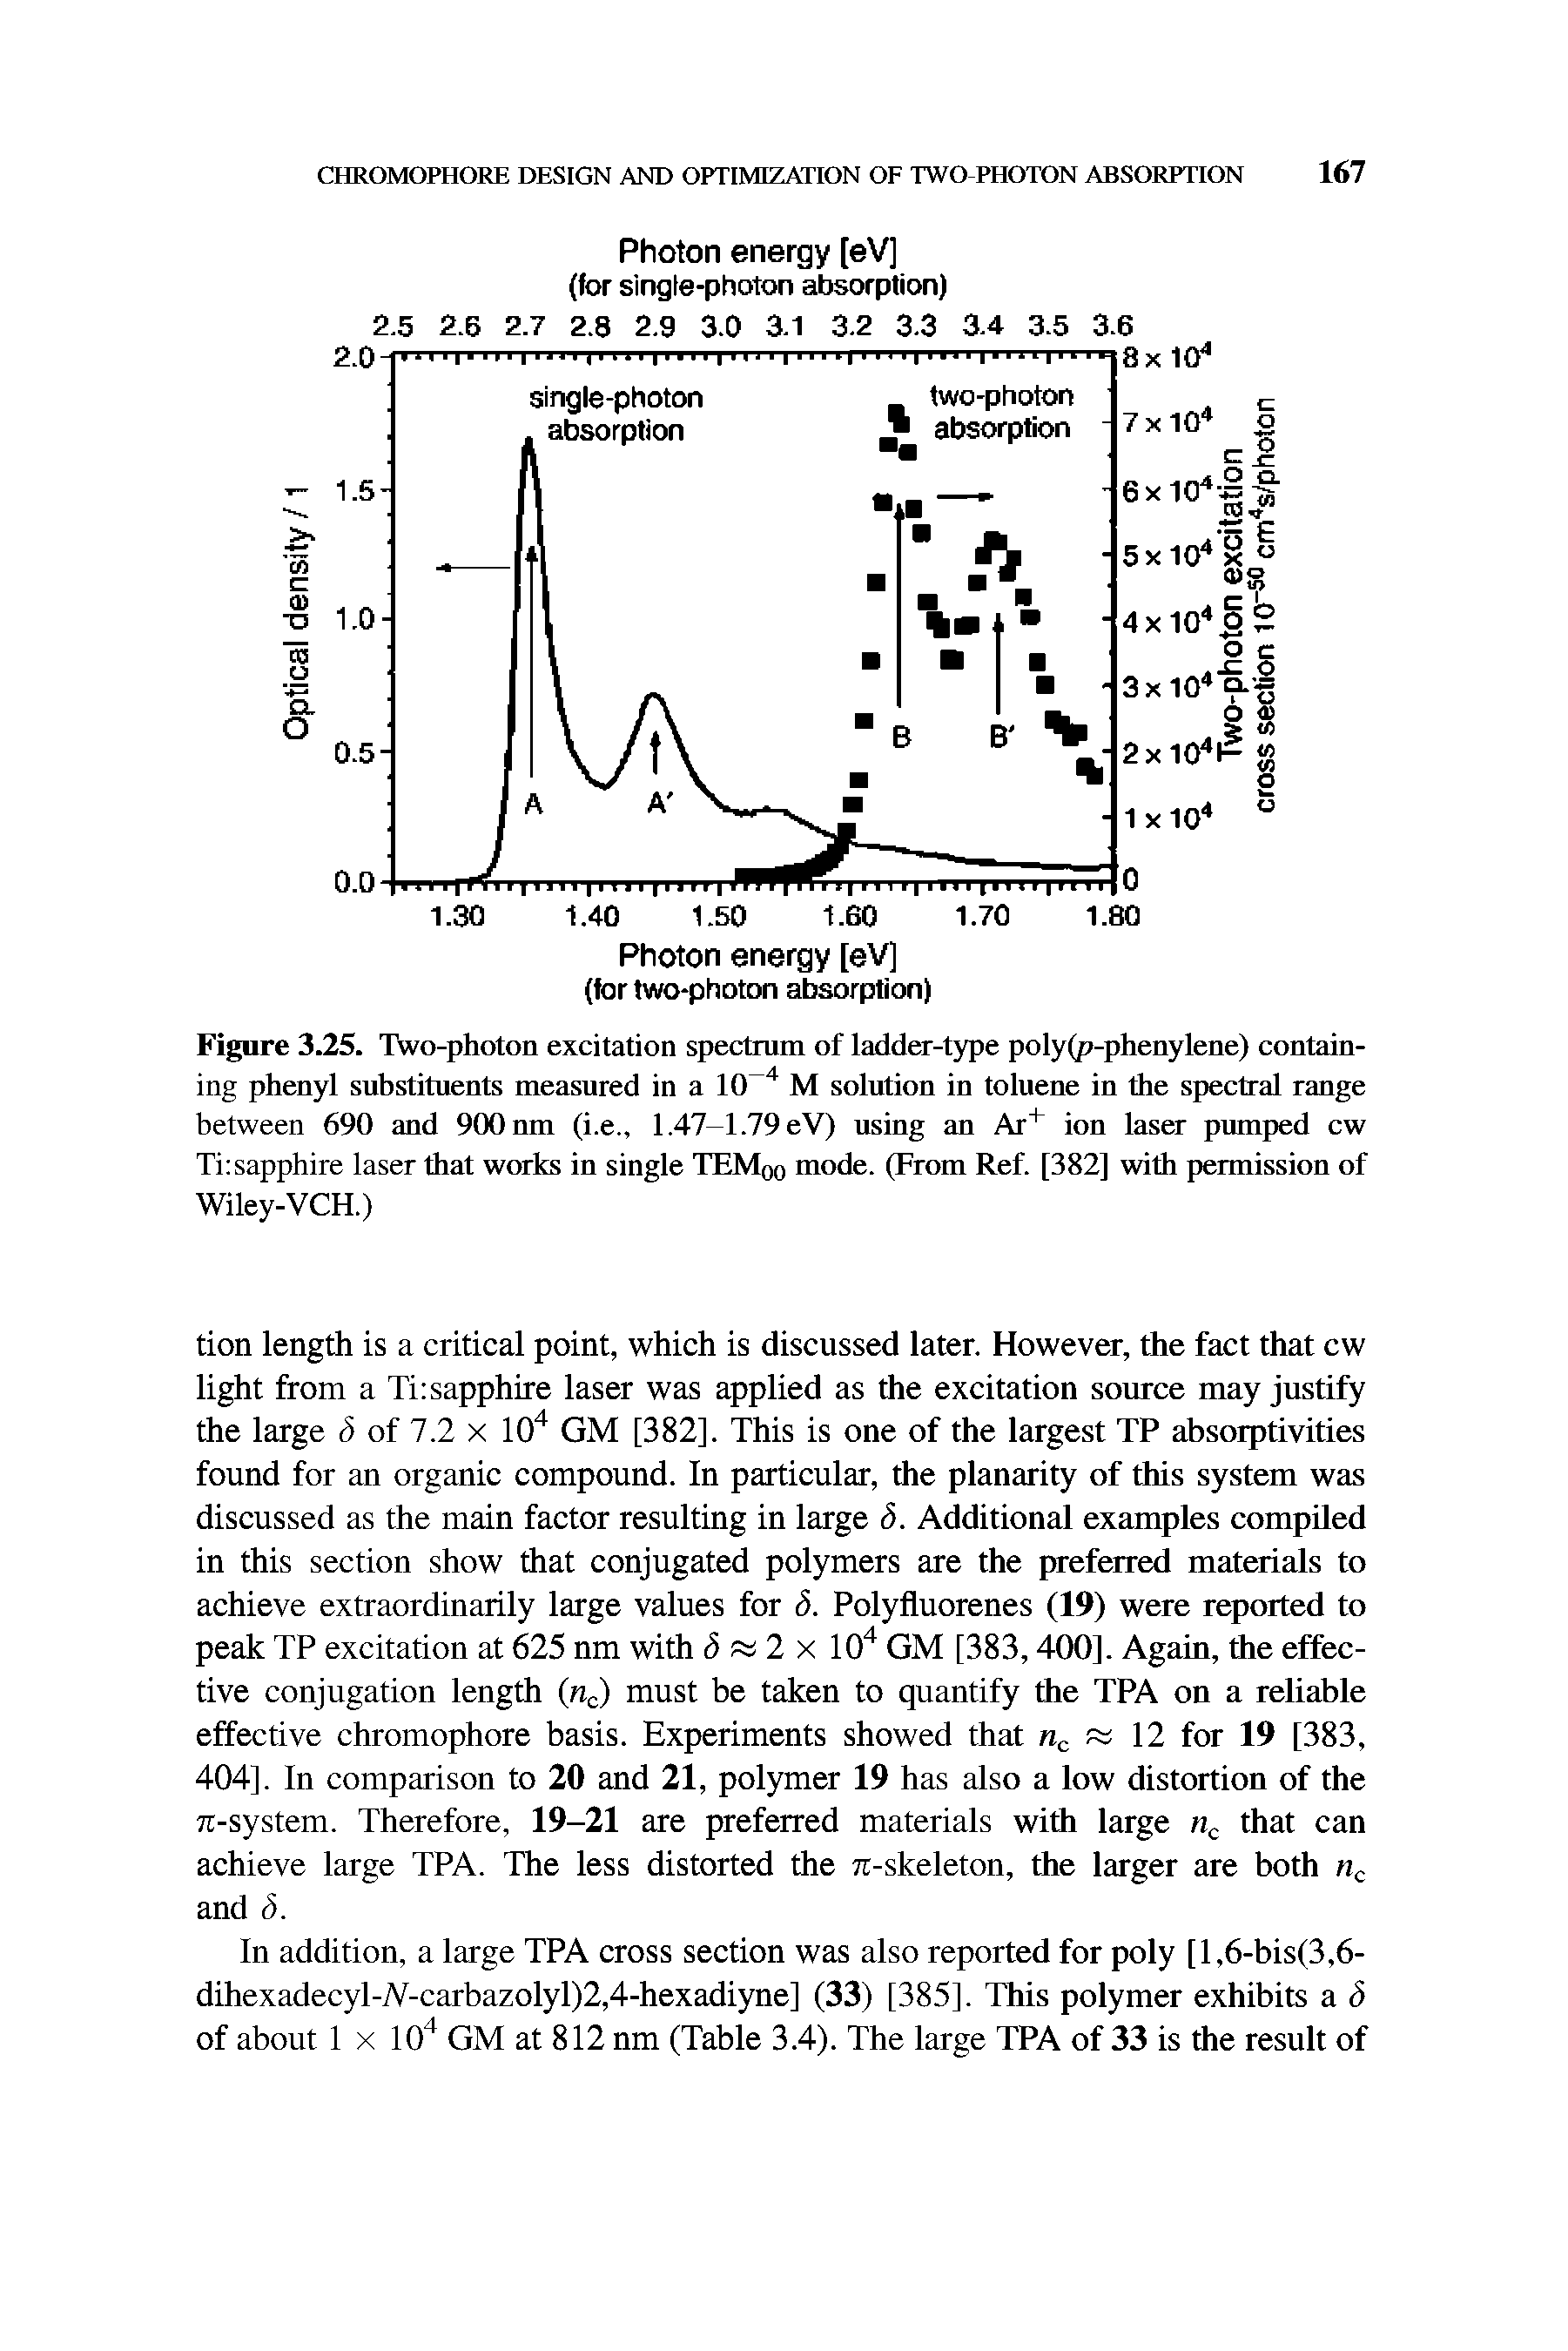 Figure 3.25. Two-photon excitation spectrum of ladder-type poly(p-phenylene) containing phenyl substituents measured in a 10 4 M solution in toluene in the spectral range between 690 and 900 nm (i.e., 1.47-1.79 eV) using an Ar+ ion laser pumped cw Ti sapphire laser that works in single TEM0o mode. (From Ref. [382] with permission of Wiley-VCH.)...